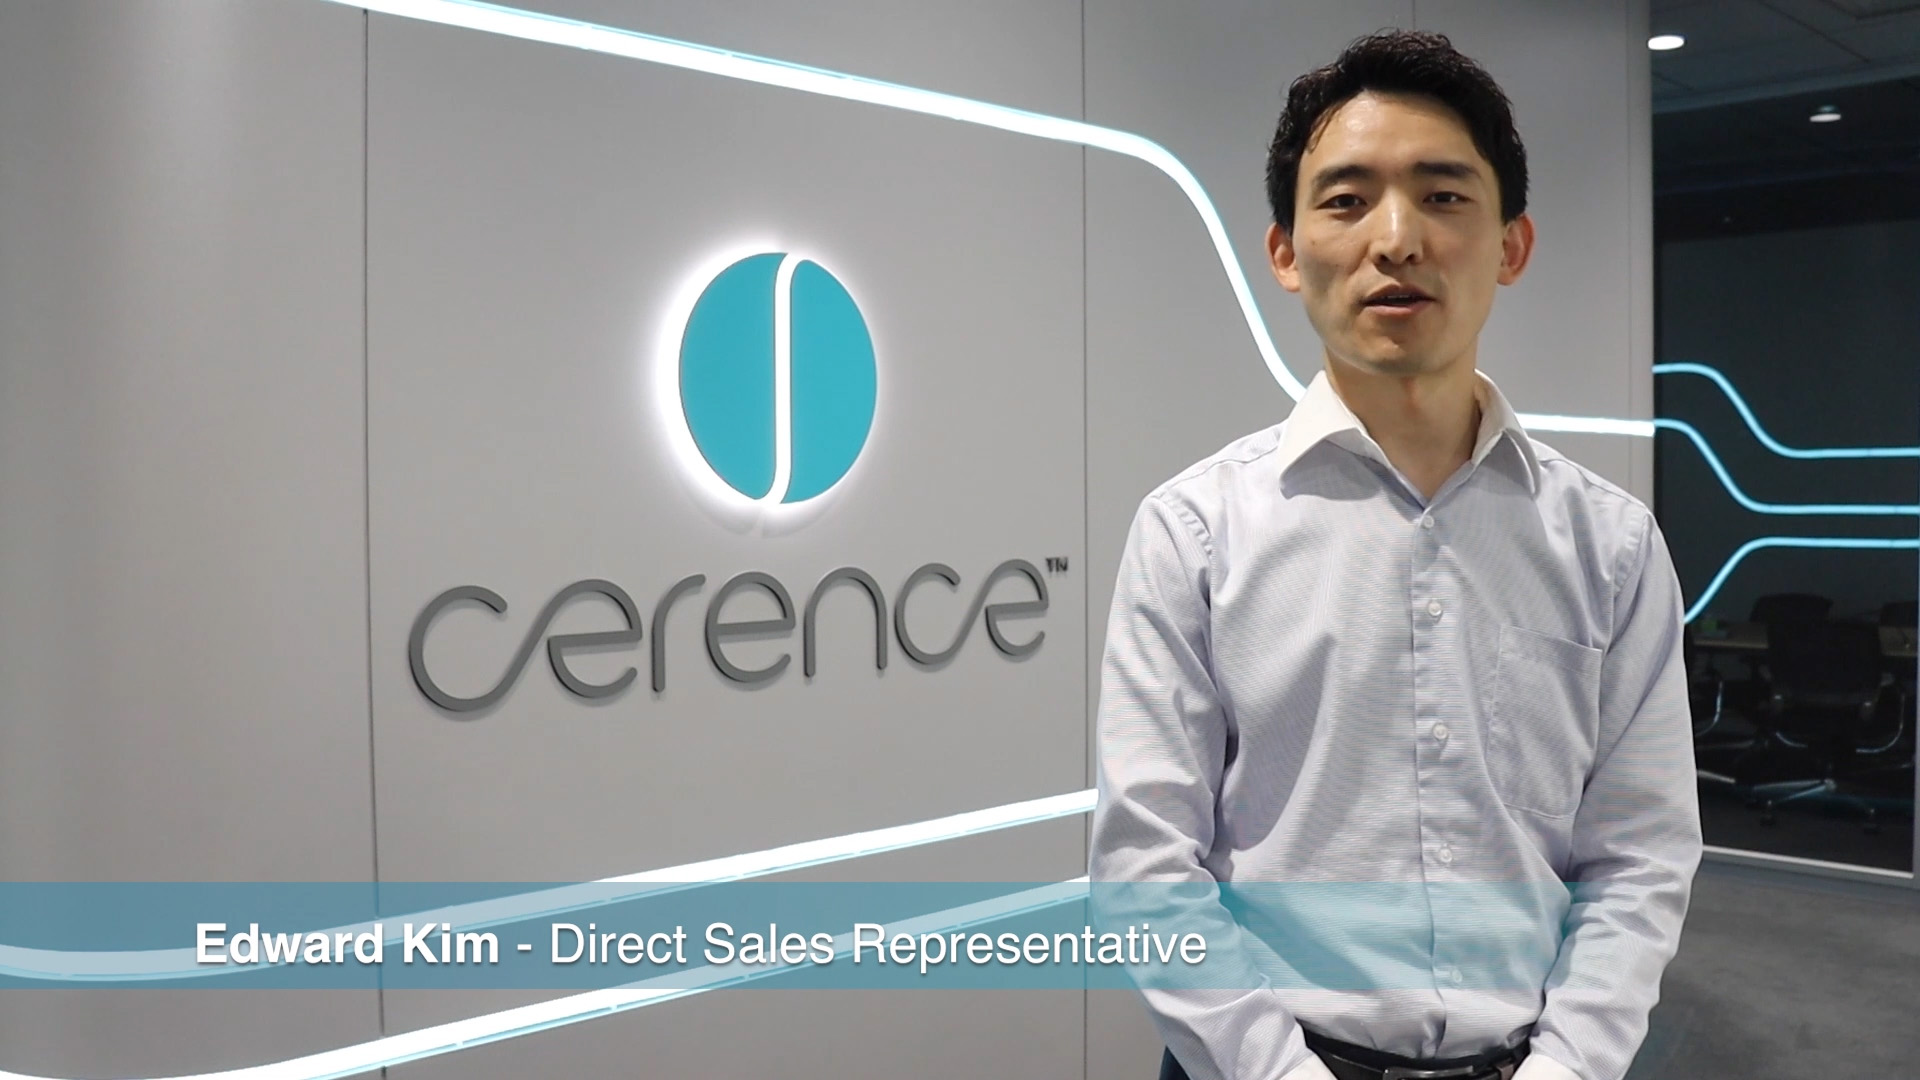 We are Cerence - Edward Kim